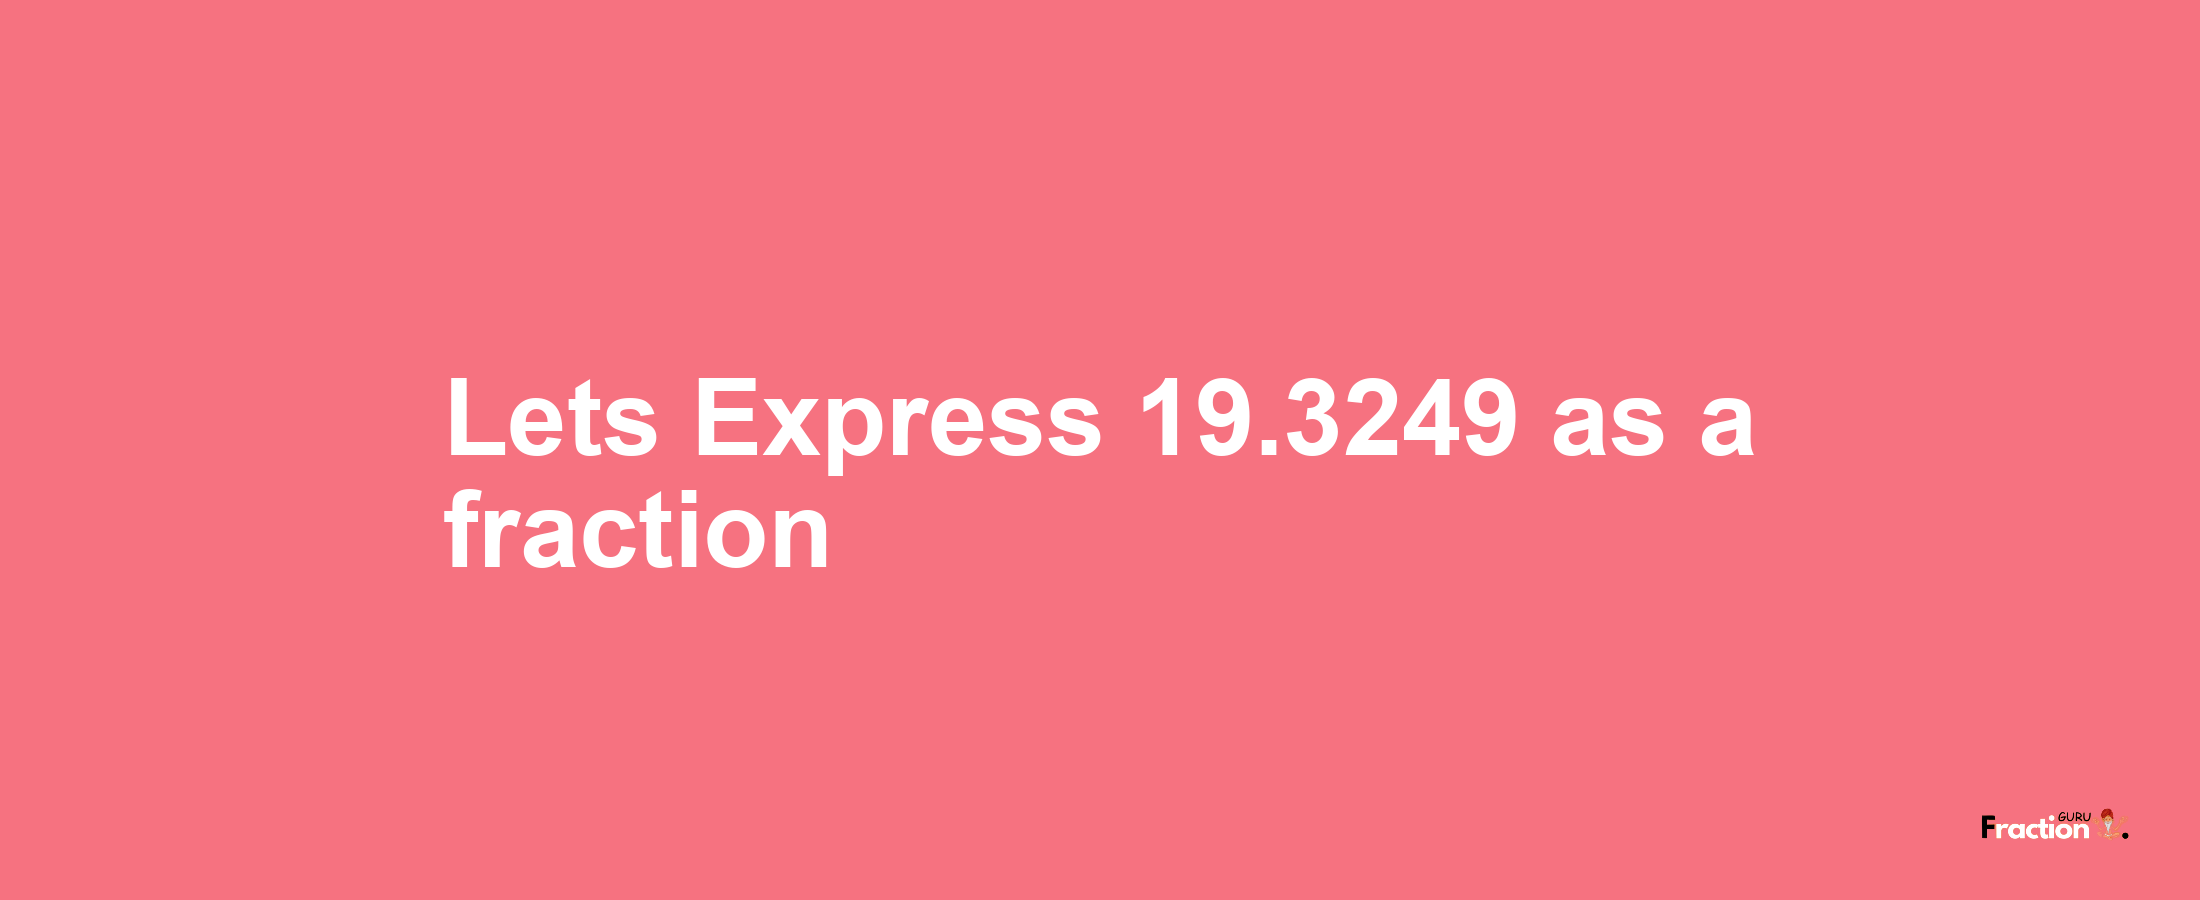 Lets Express 19.3249 as afraction